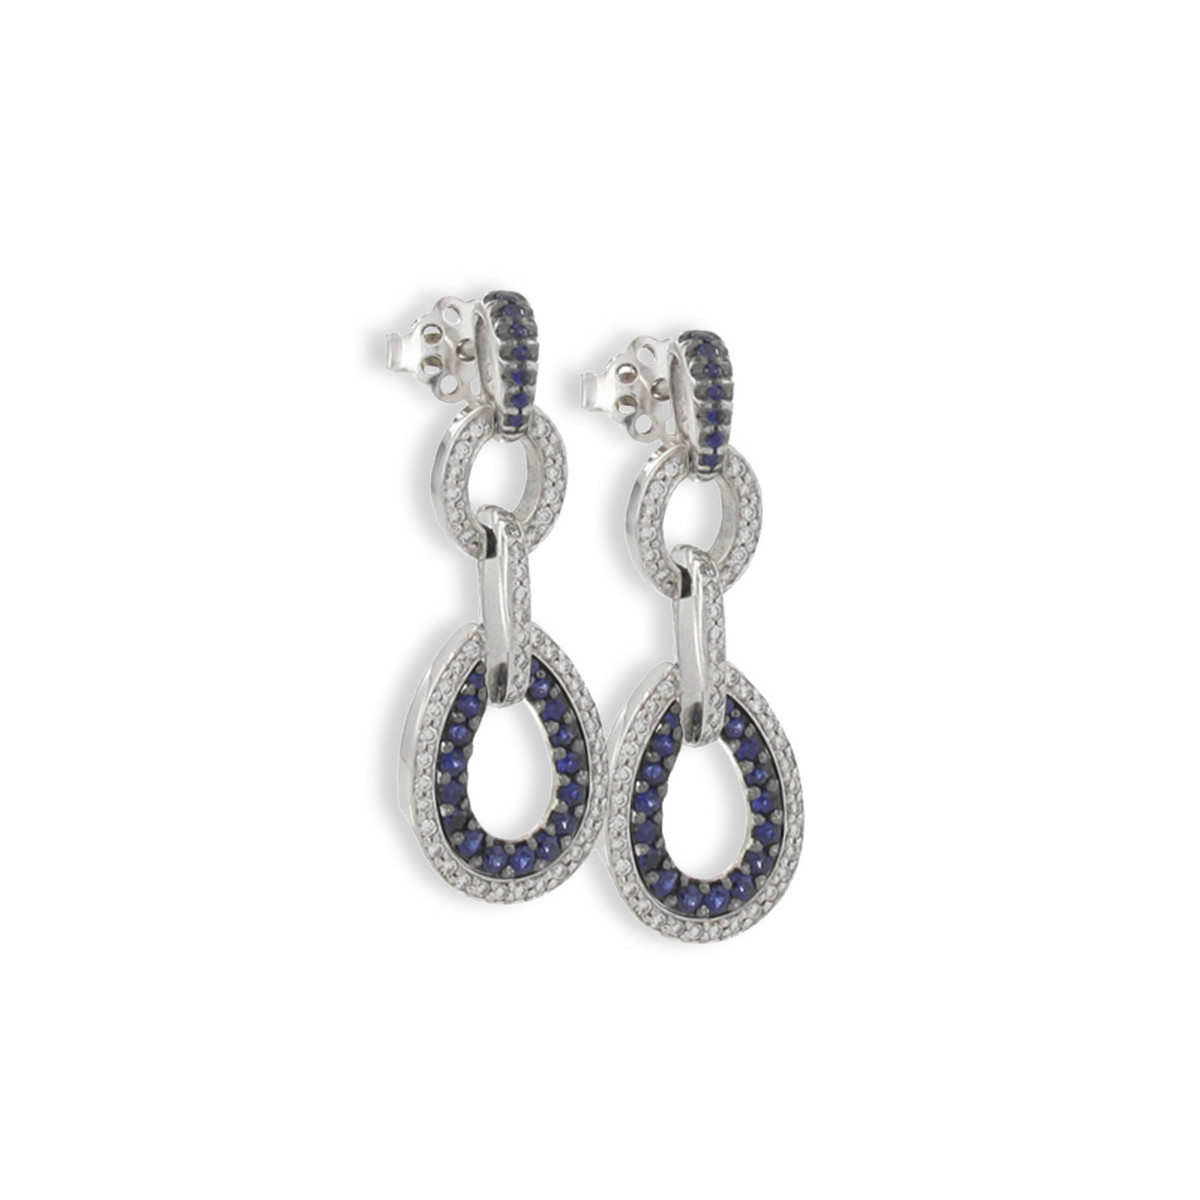 GOLD DIAMOND AND SAPPHIRE EARINGS